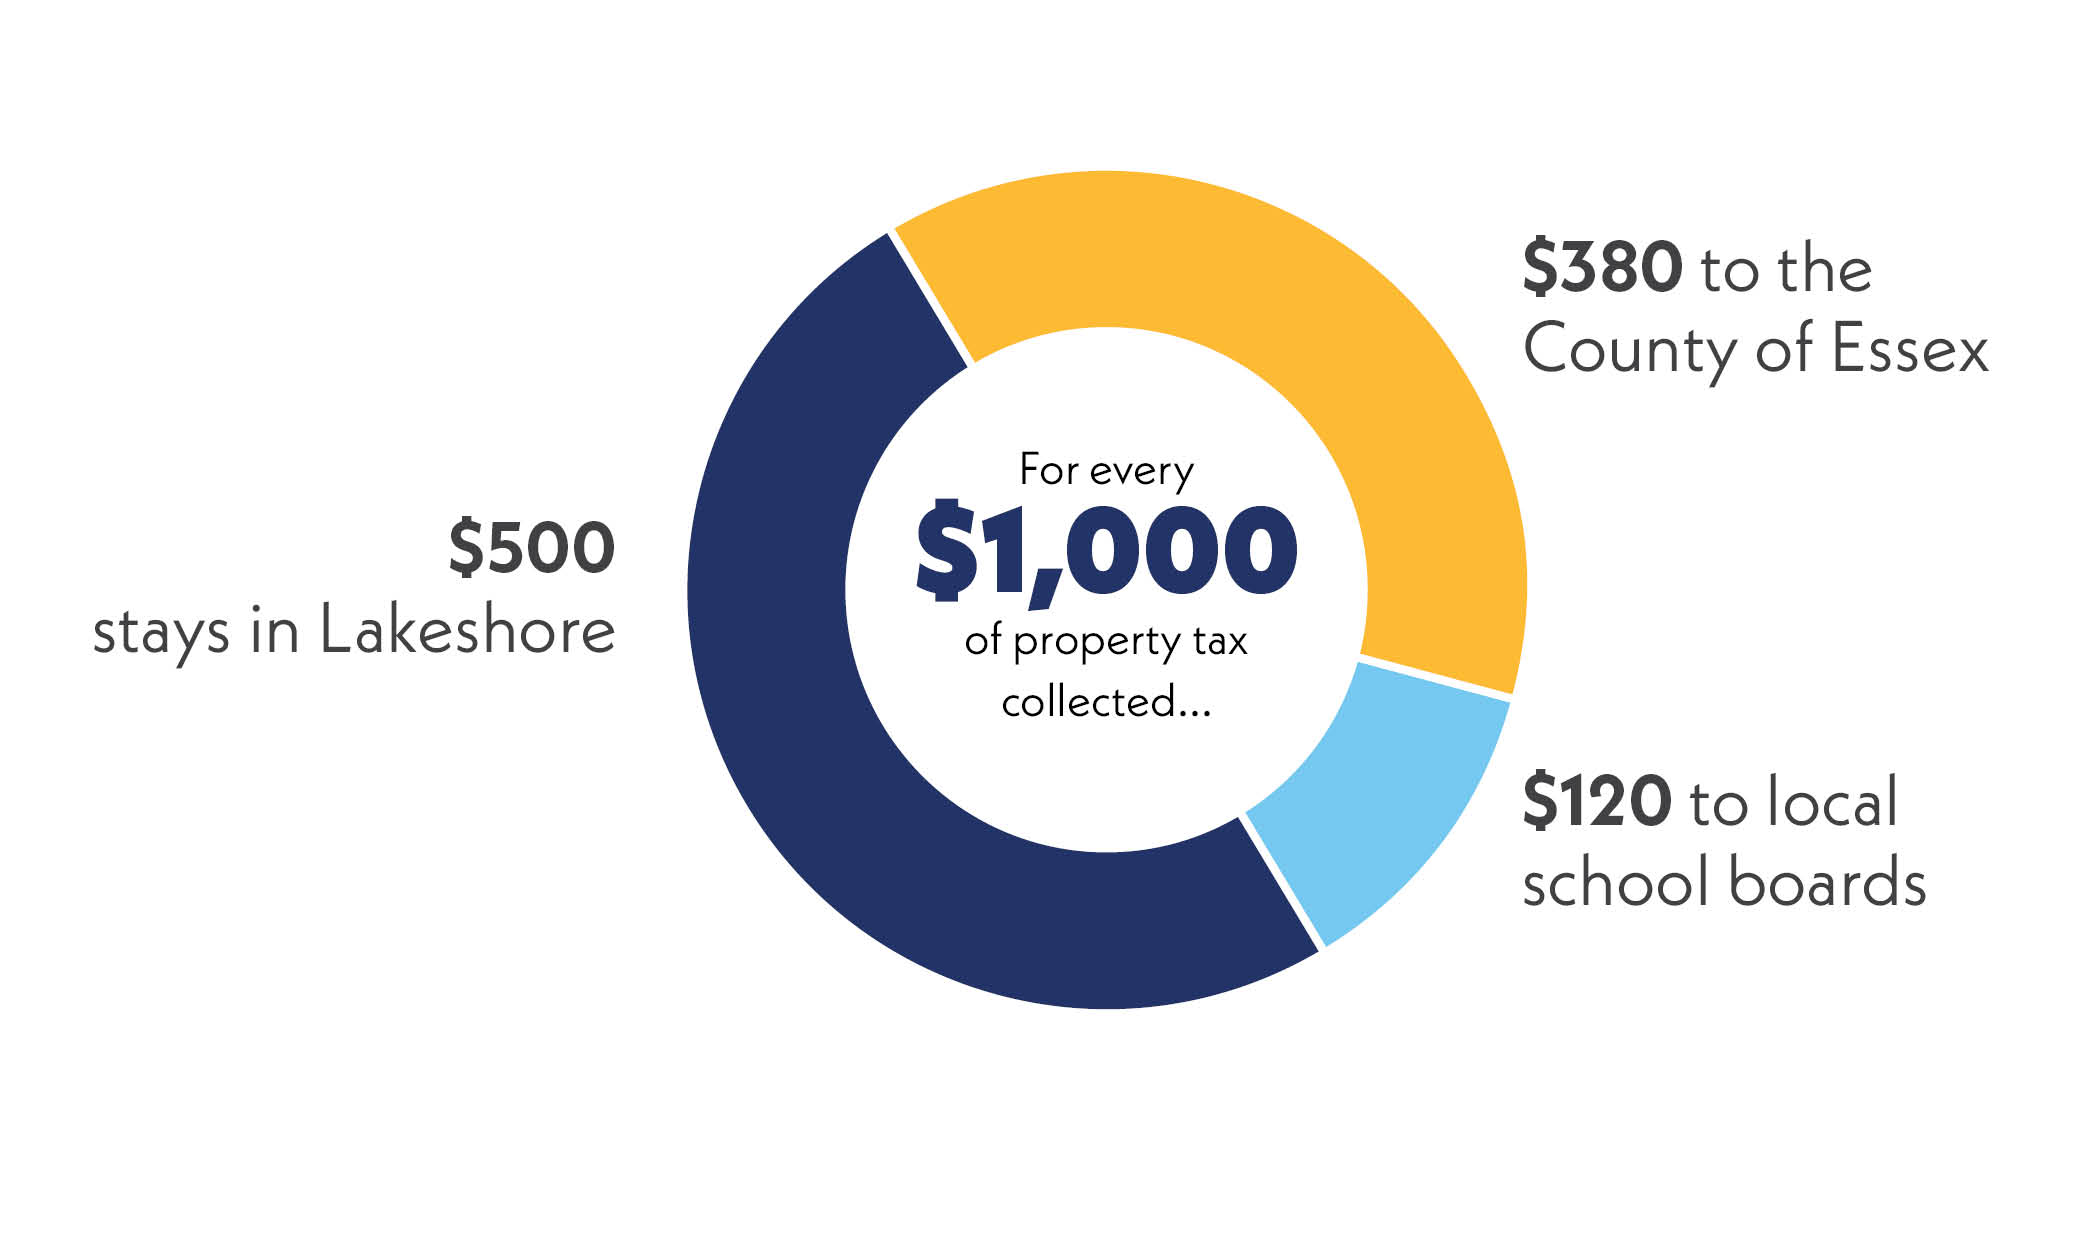 Pie chart showing how $1,000 of tax dollars are distributed. $500 stays in Lakeshore, $380 goes to the County of Essex, and $120 goes to local school boards.